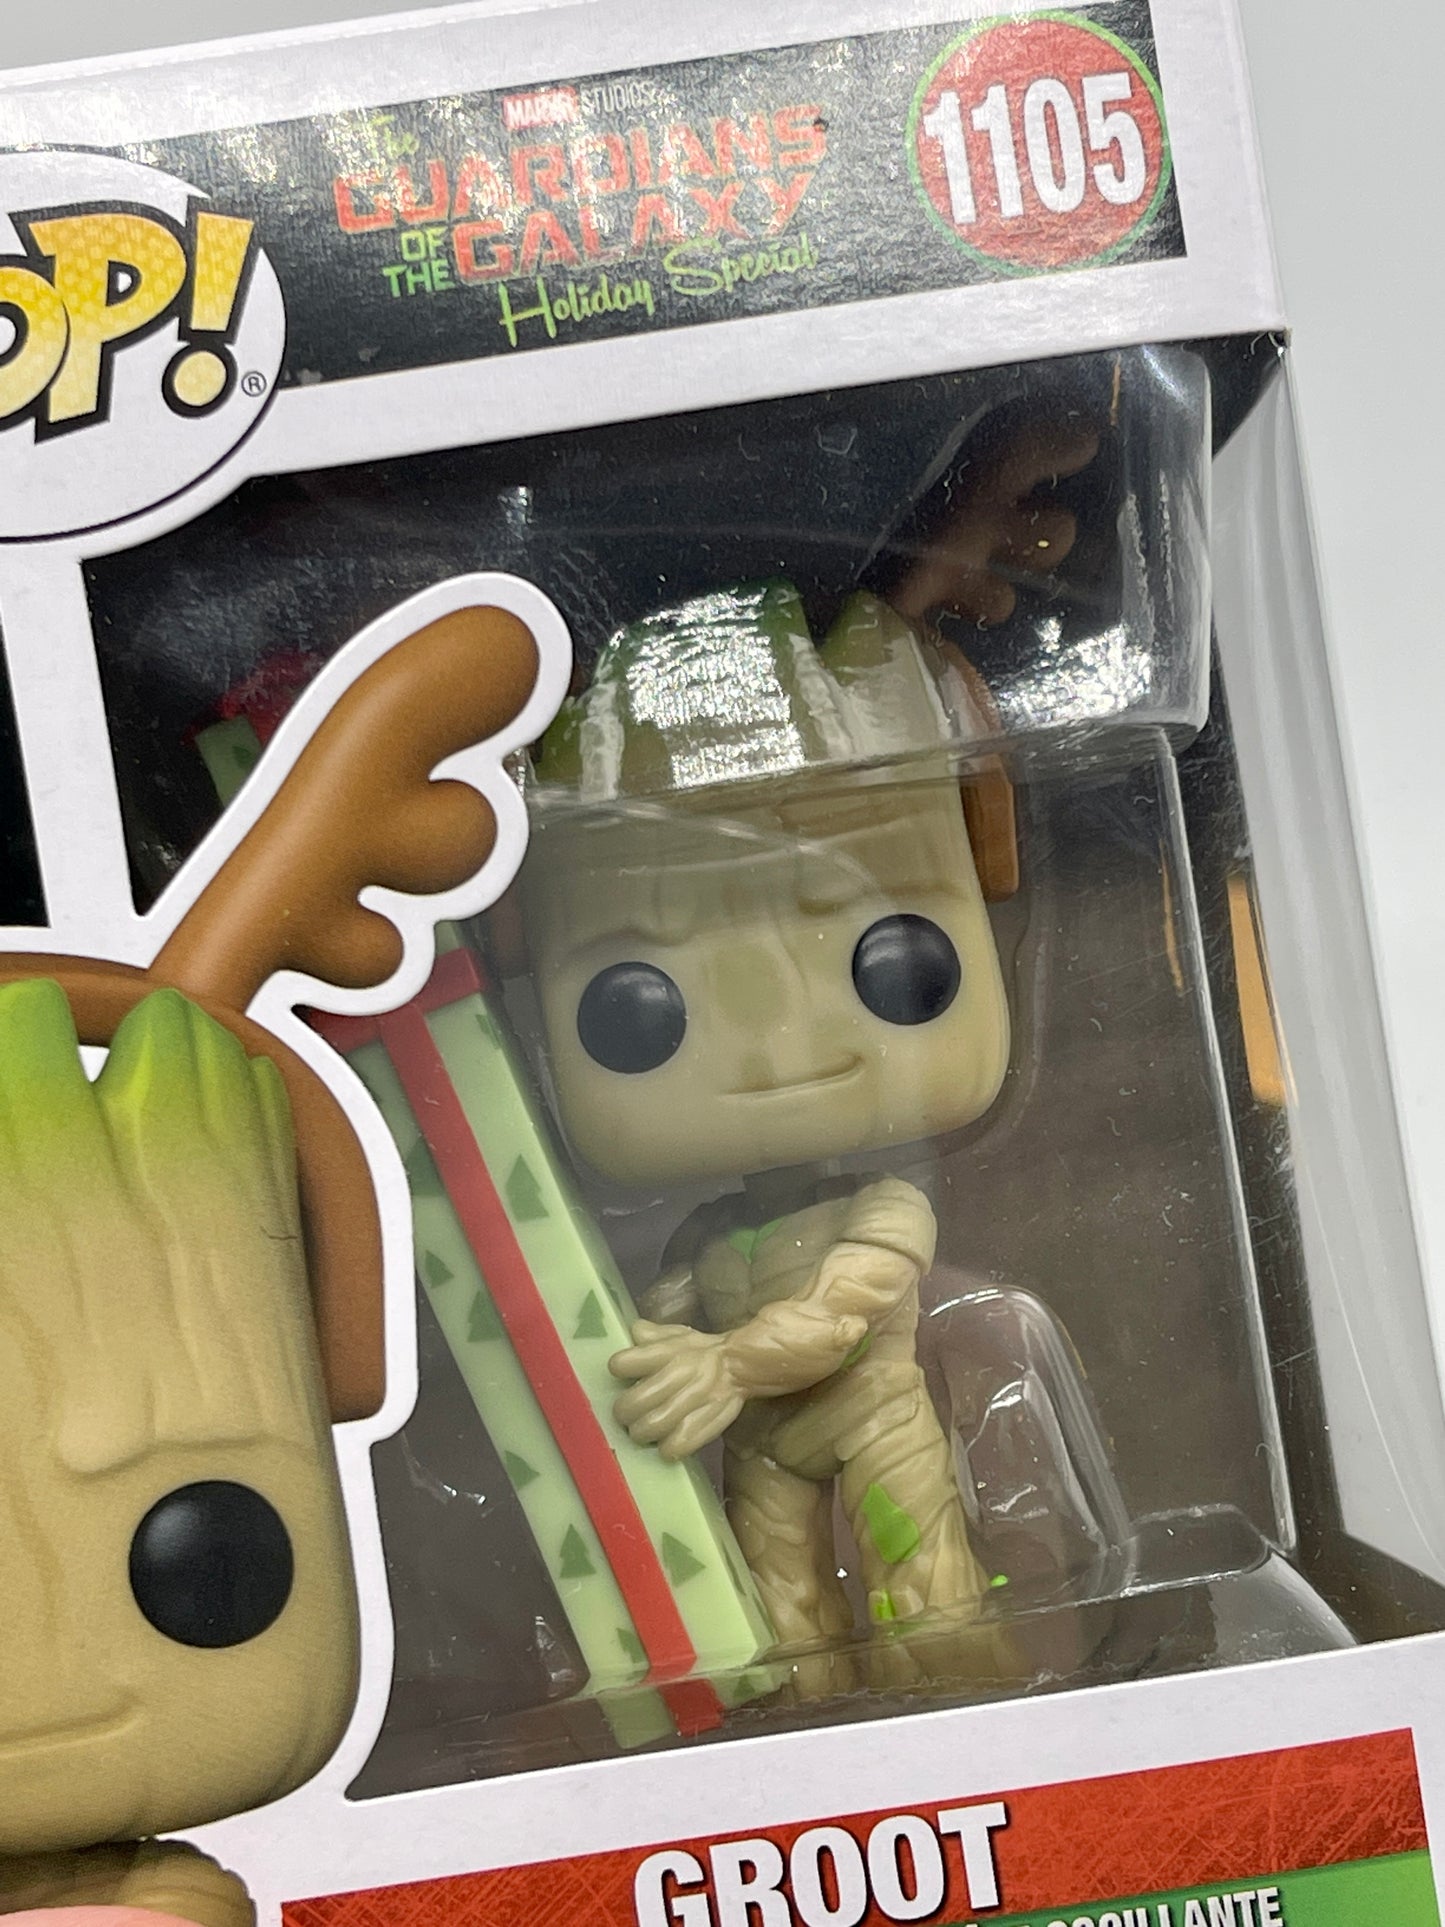 Funko POP "Groot" Guardians of the Galaxy Holiday Special Marvel #1105 (2022)